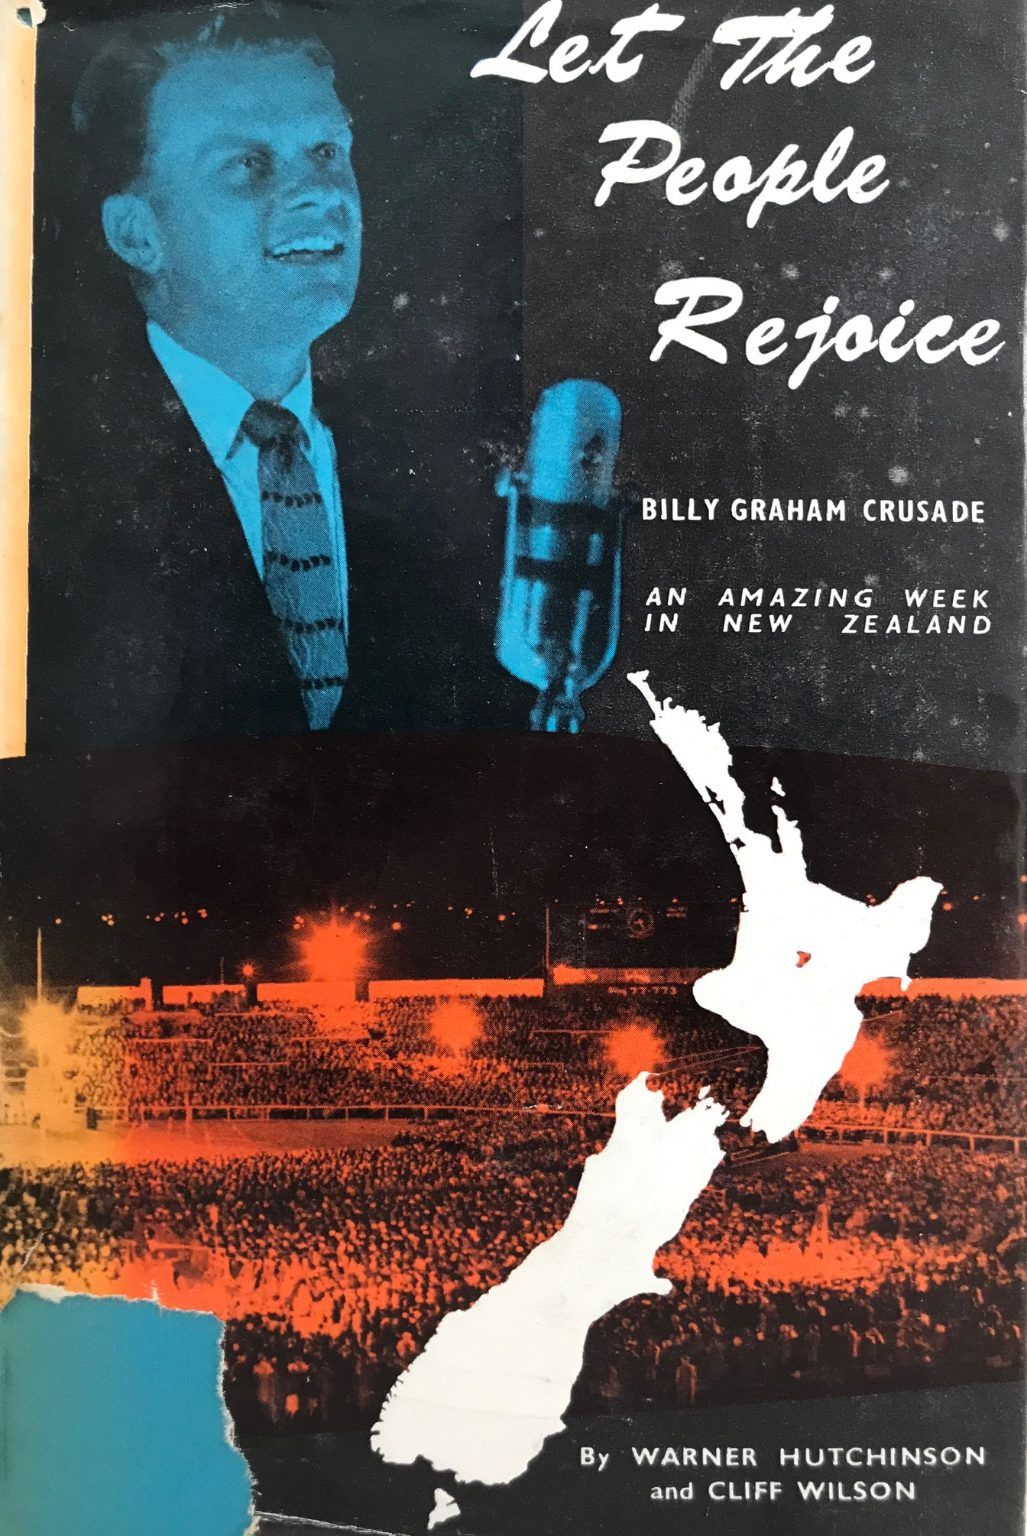 LET THE PEOPLE REJOICE: Billy Graham Crusade, an Amazing Week in New Zealand